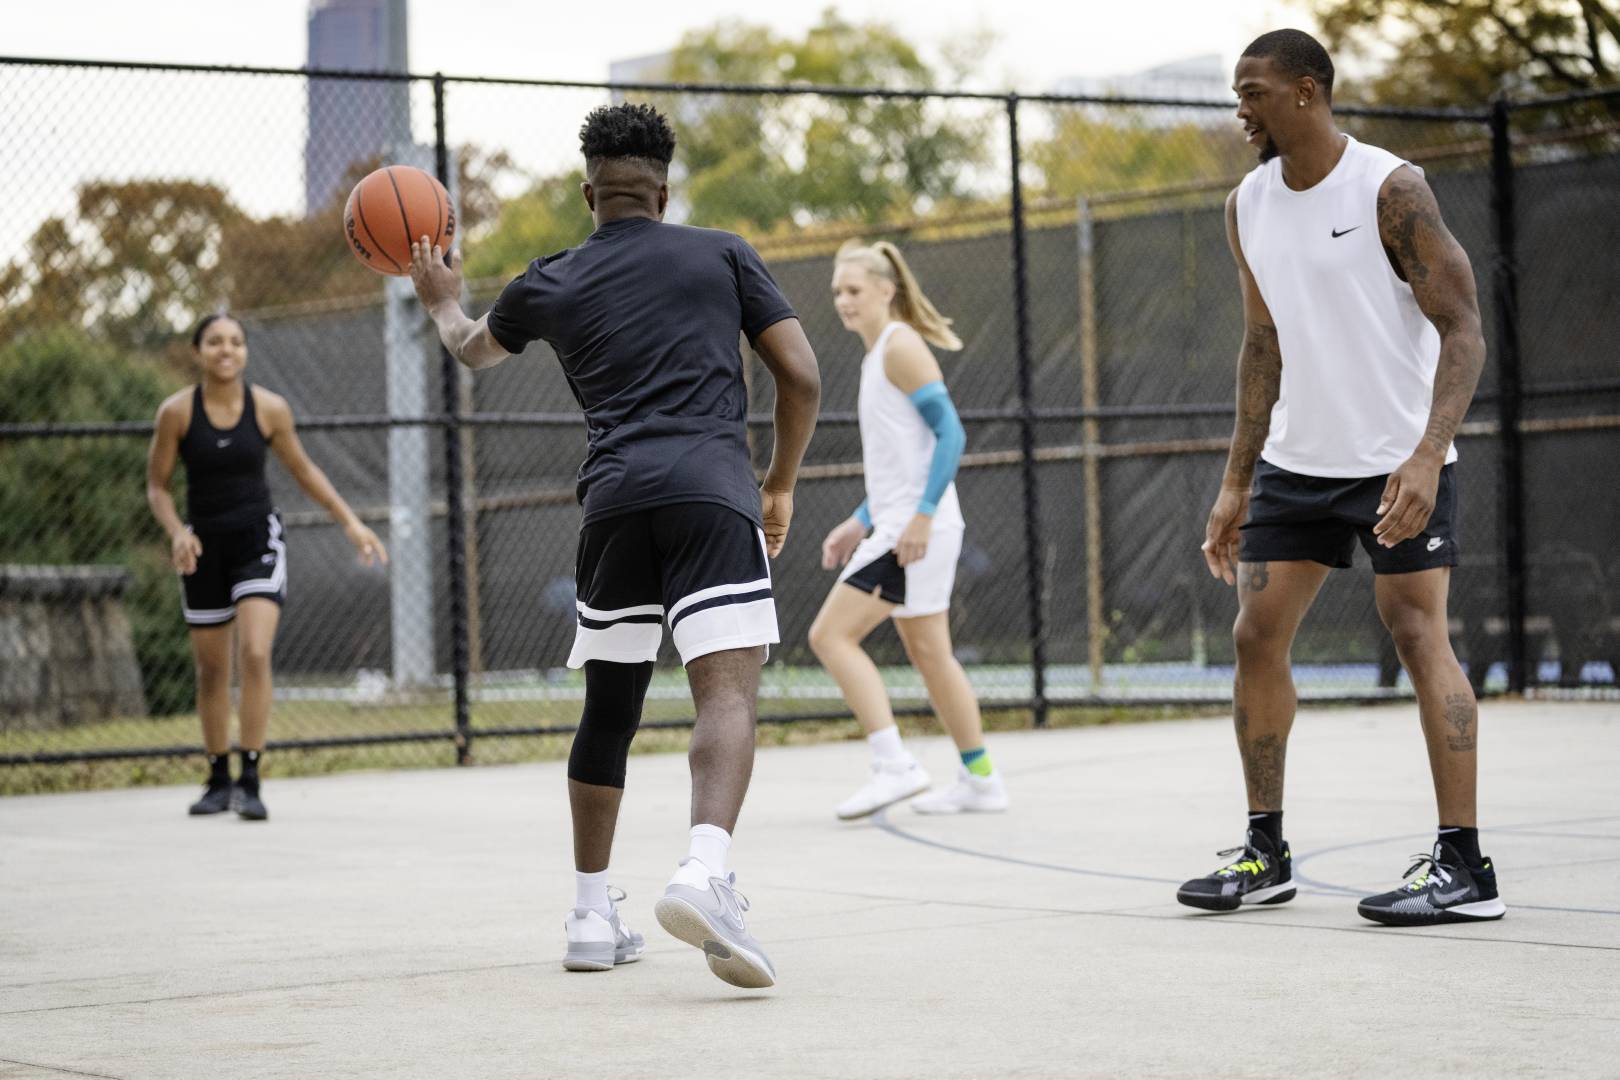 Four players during a street ball game of the players in black game clothes fits the ball with his teammate